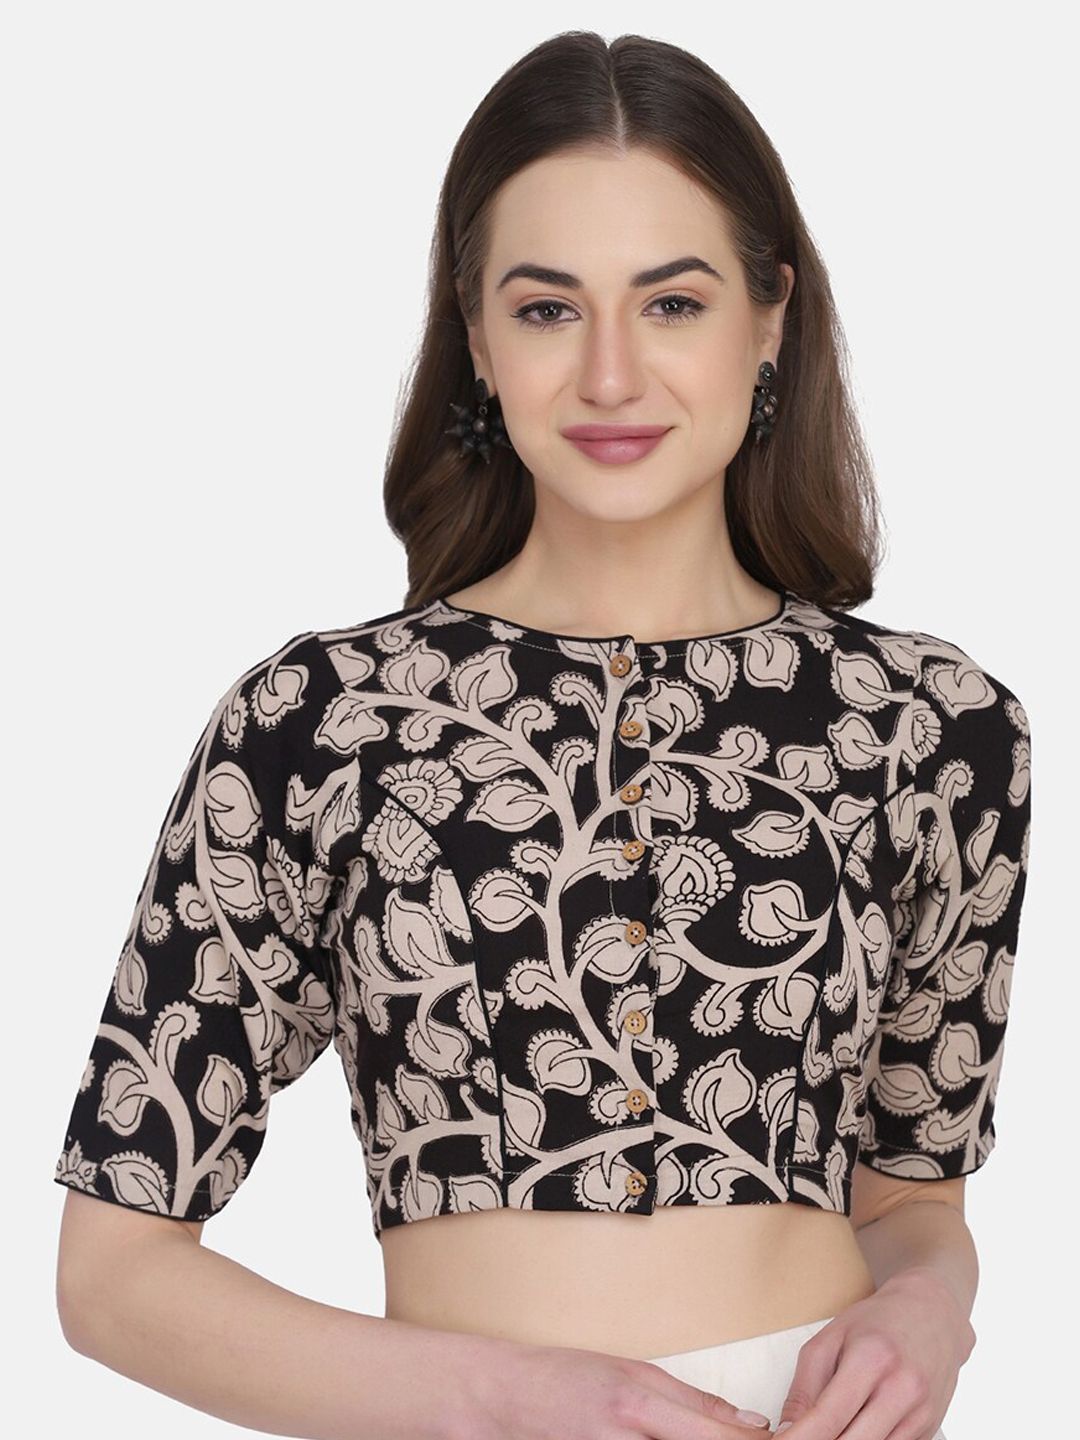 THE WEAVE TRAVELLER Black & Beige Block Printed Cotton Saree Blouse Price in India